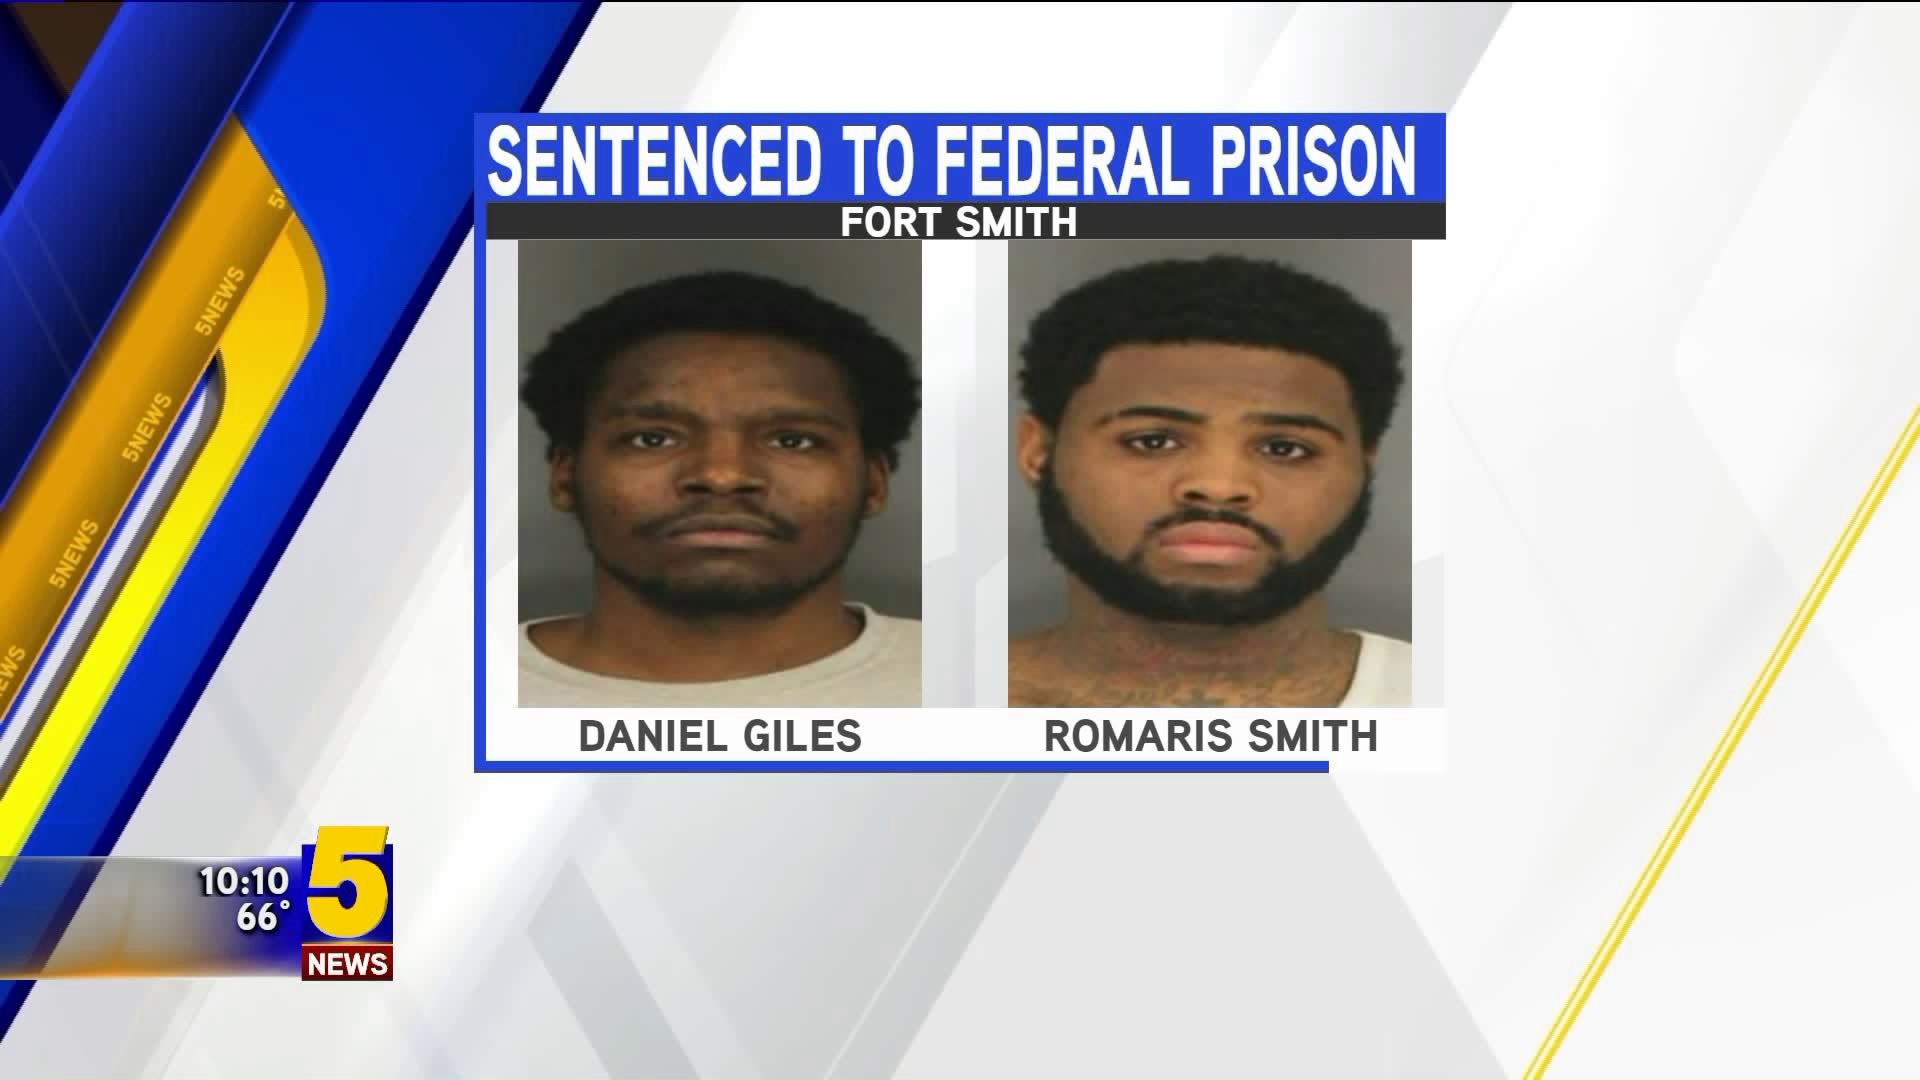 Bank Robbers Sentenced to Federal Prison